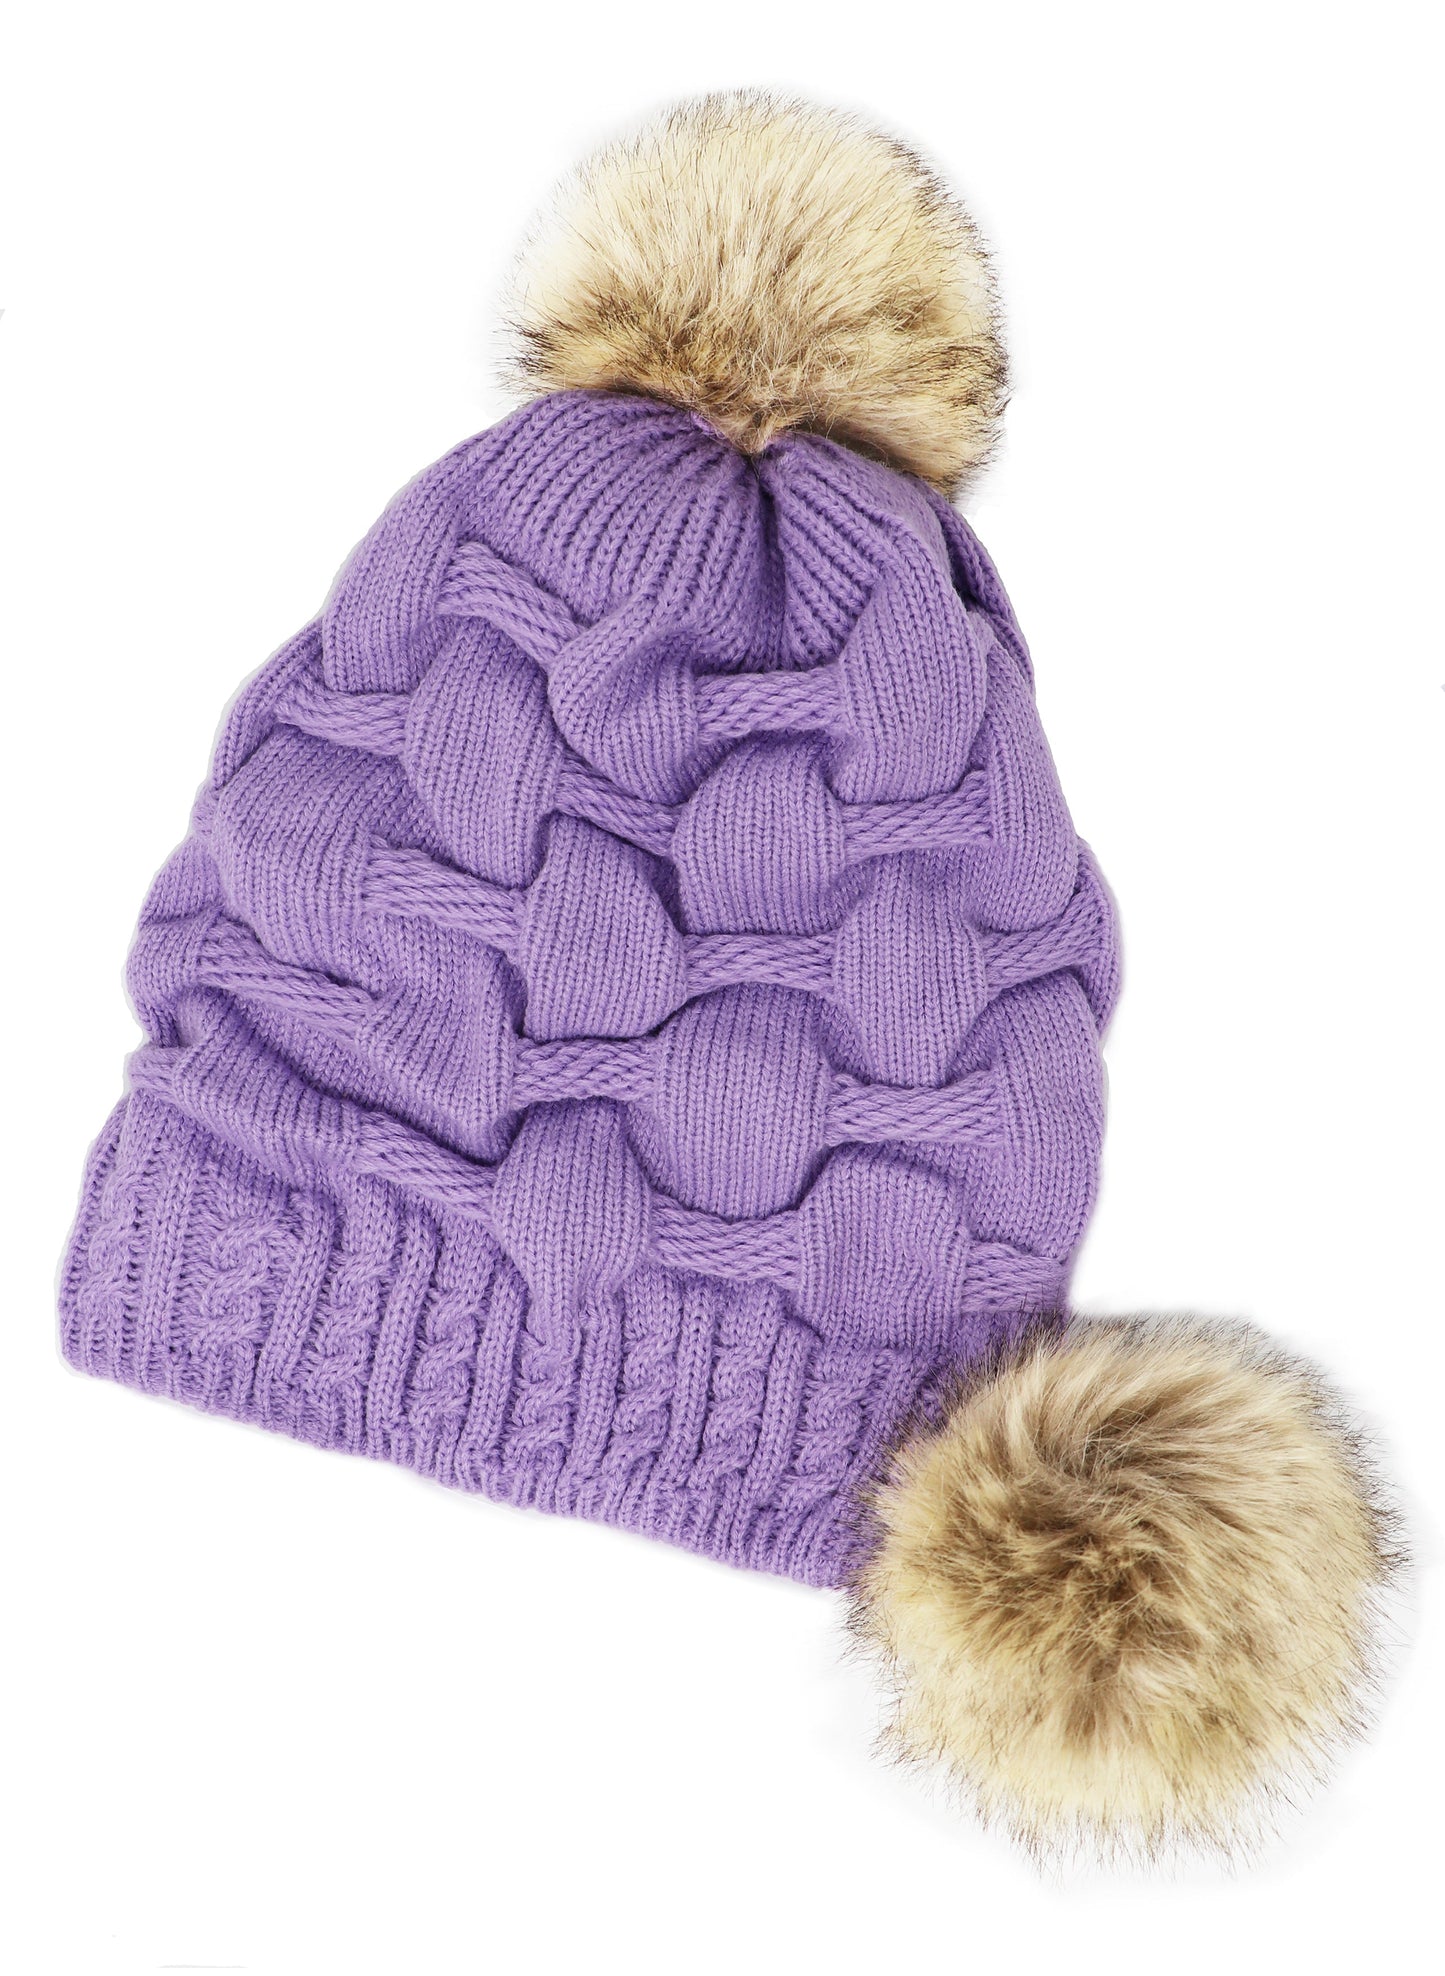 Scrunched Winter Pom Pom Knitted hat, One Size